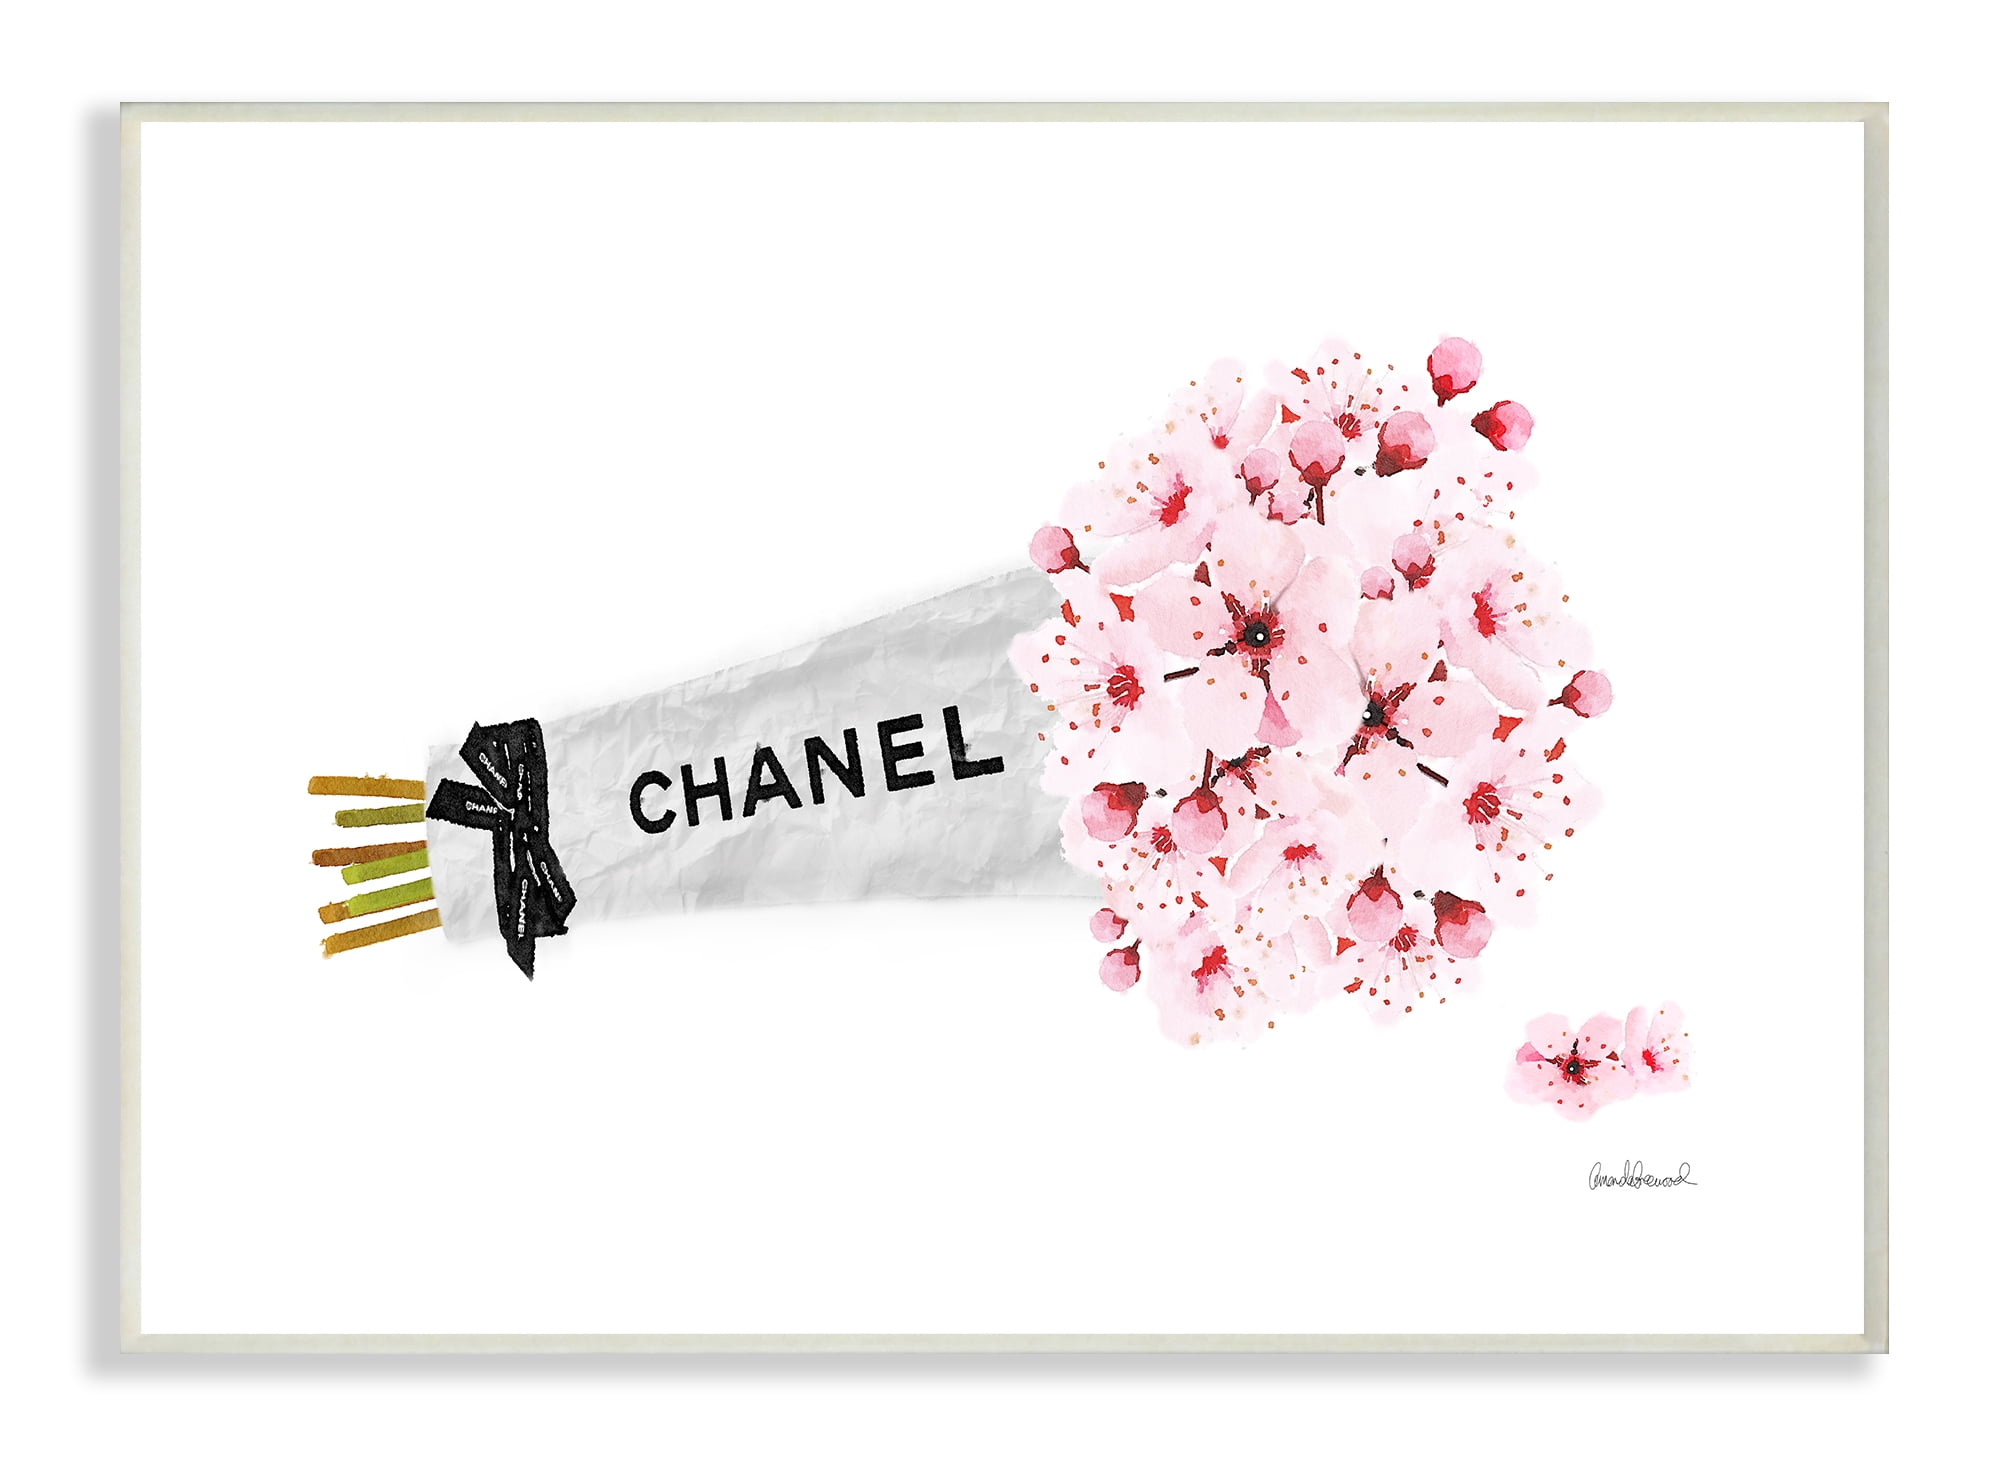 Chanel Pictures For Wall Deals  benimk12tr 1688039218